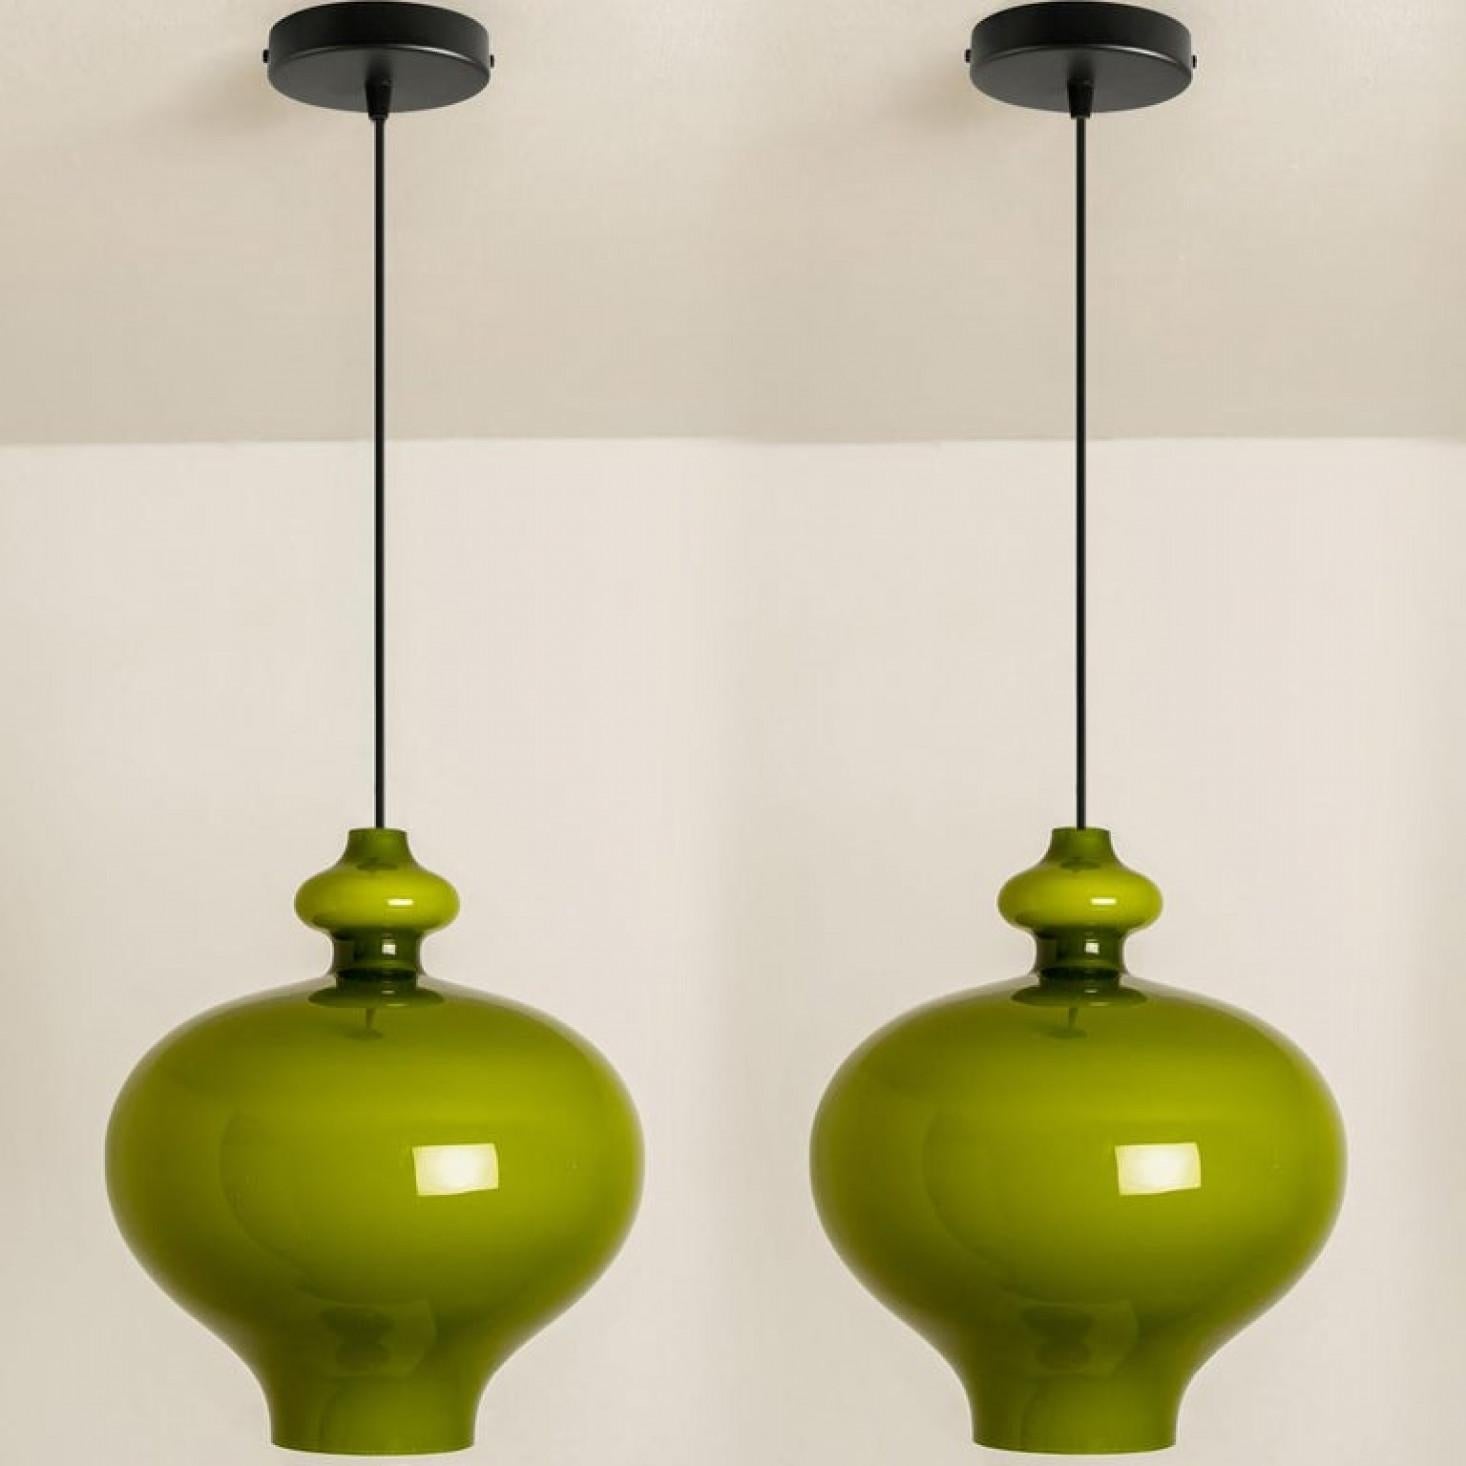 Pair of Hans-Agne Jakobsson for Staff Green Glass Pendant Lights, 1960 For Sale 8